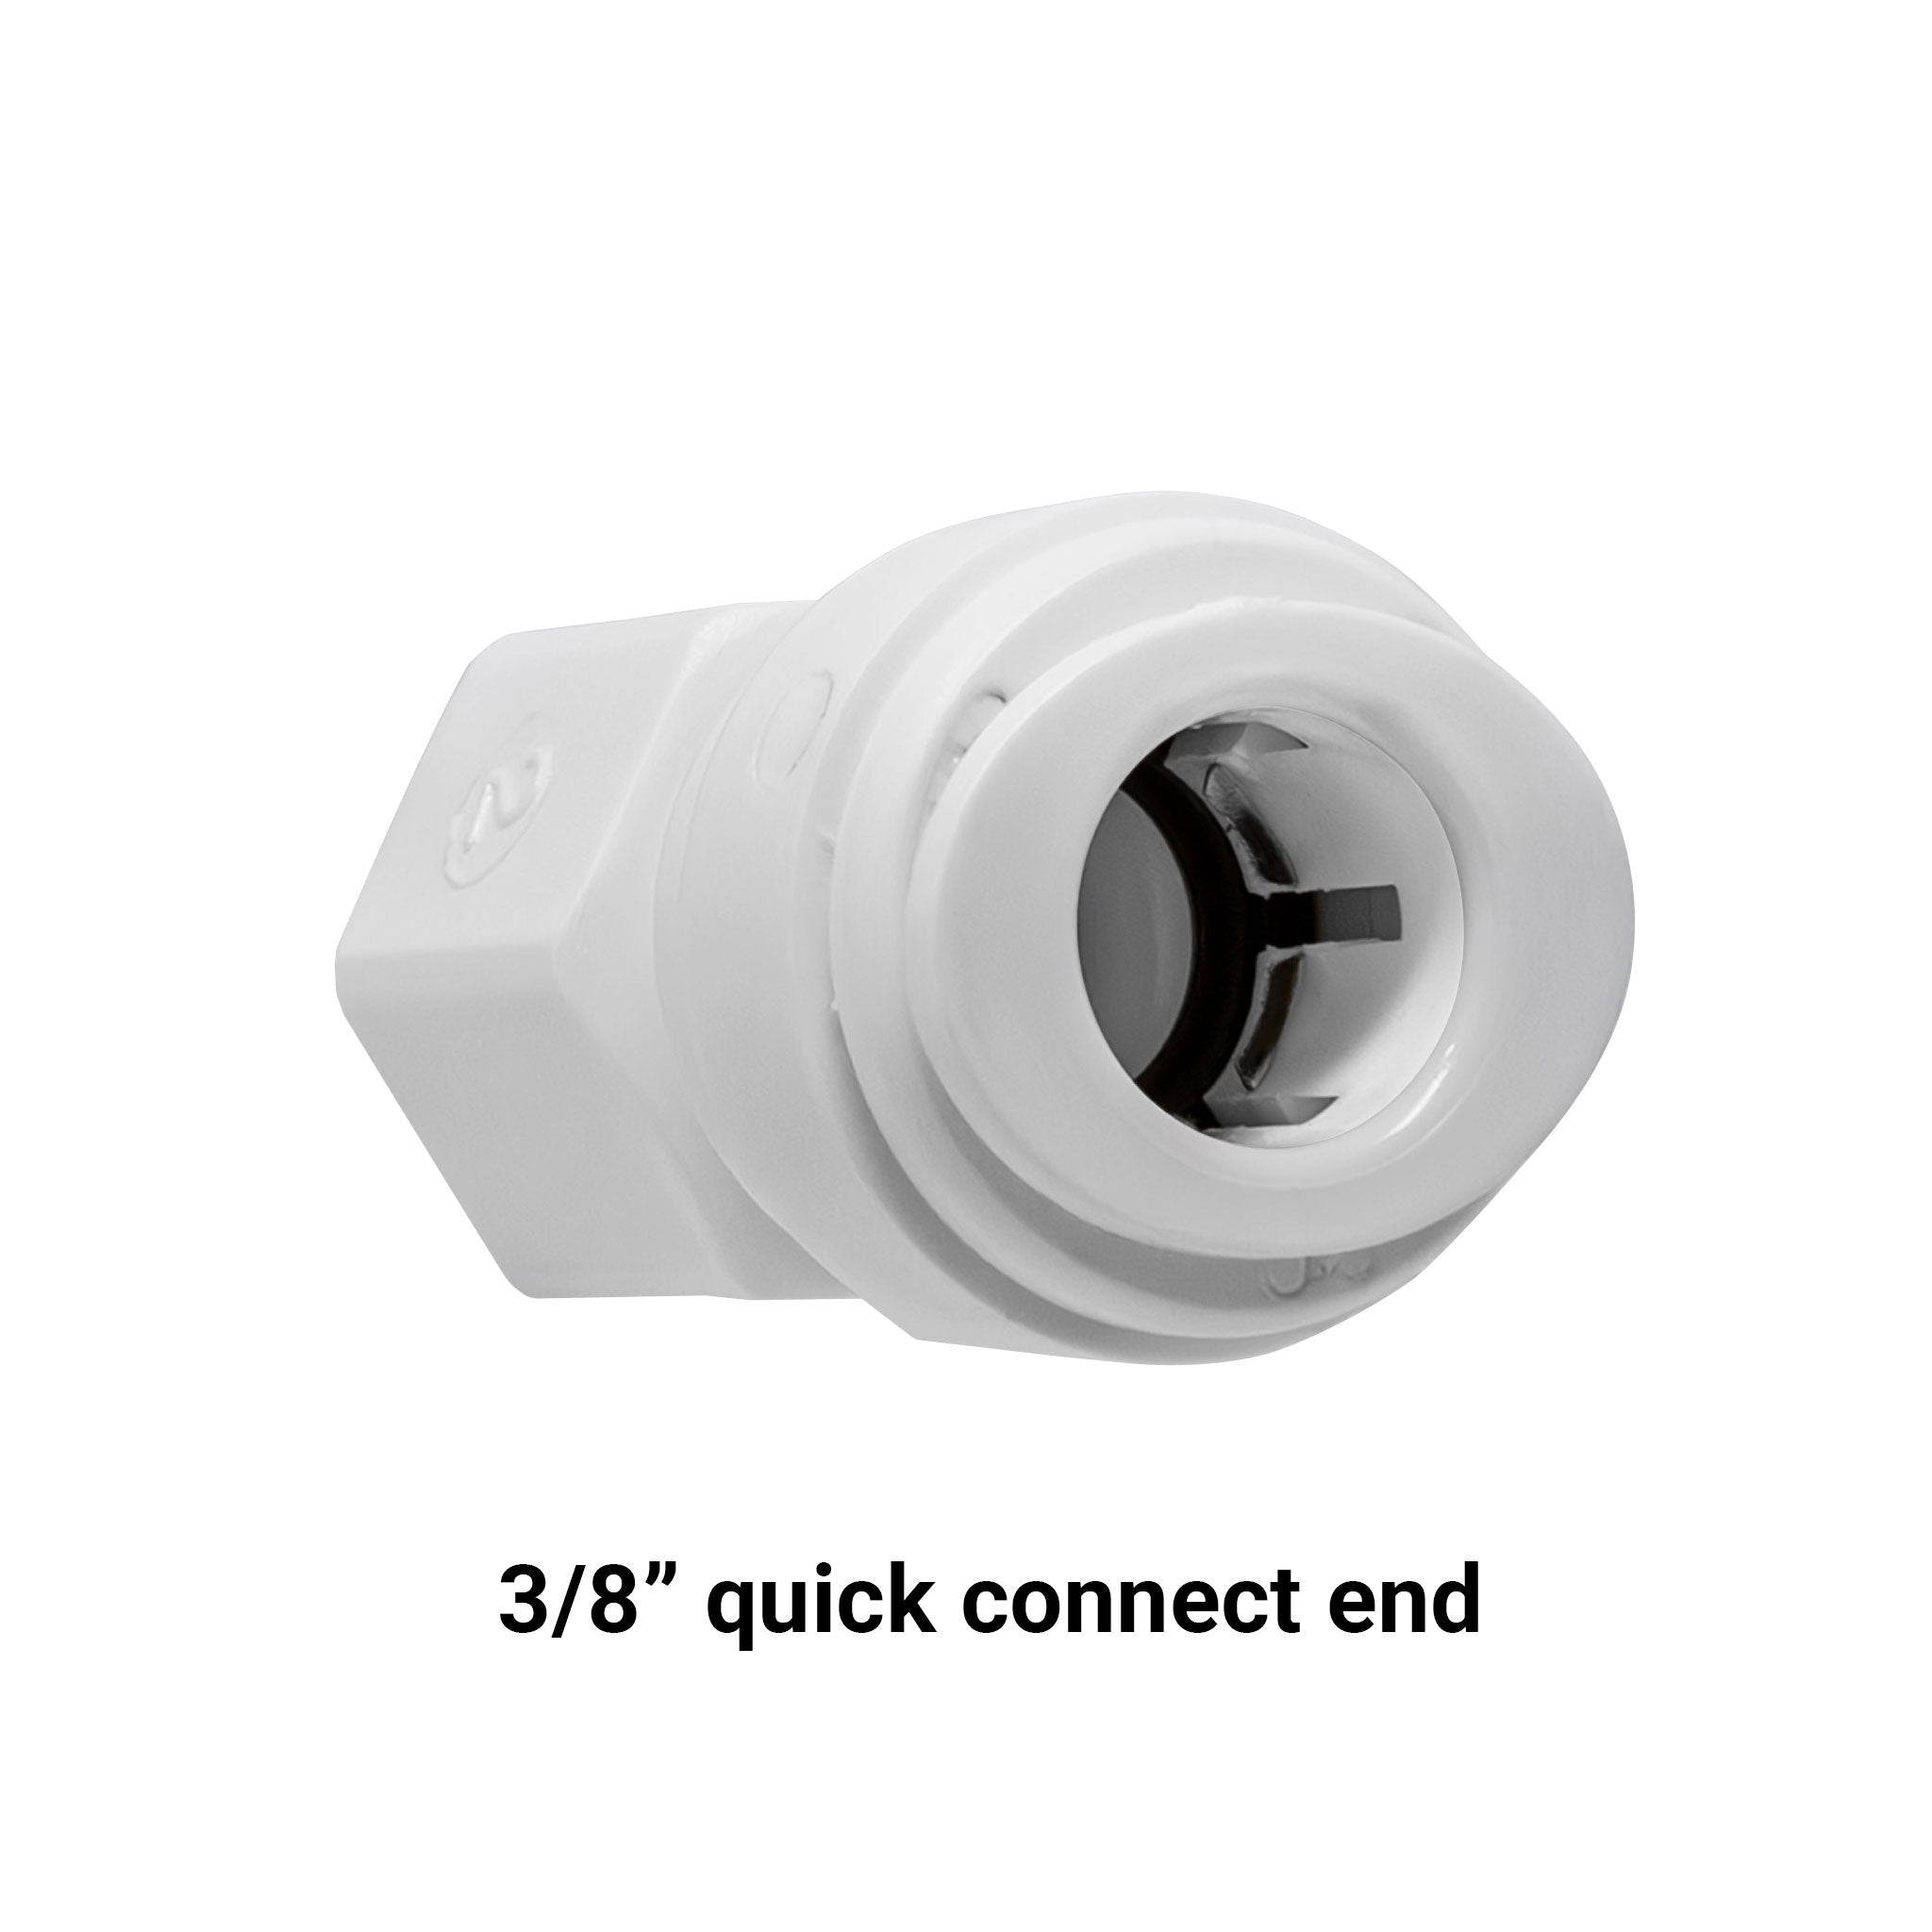 3/8" Universal Reverse Osmosis Quick Connect Faucet Adapter